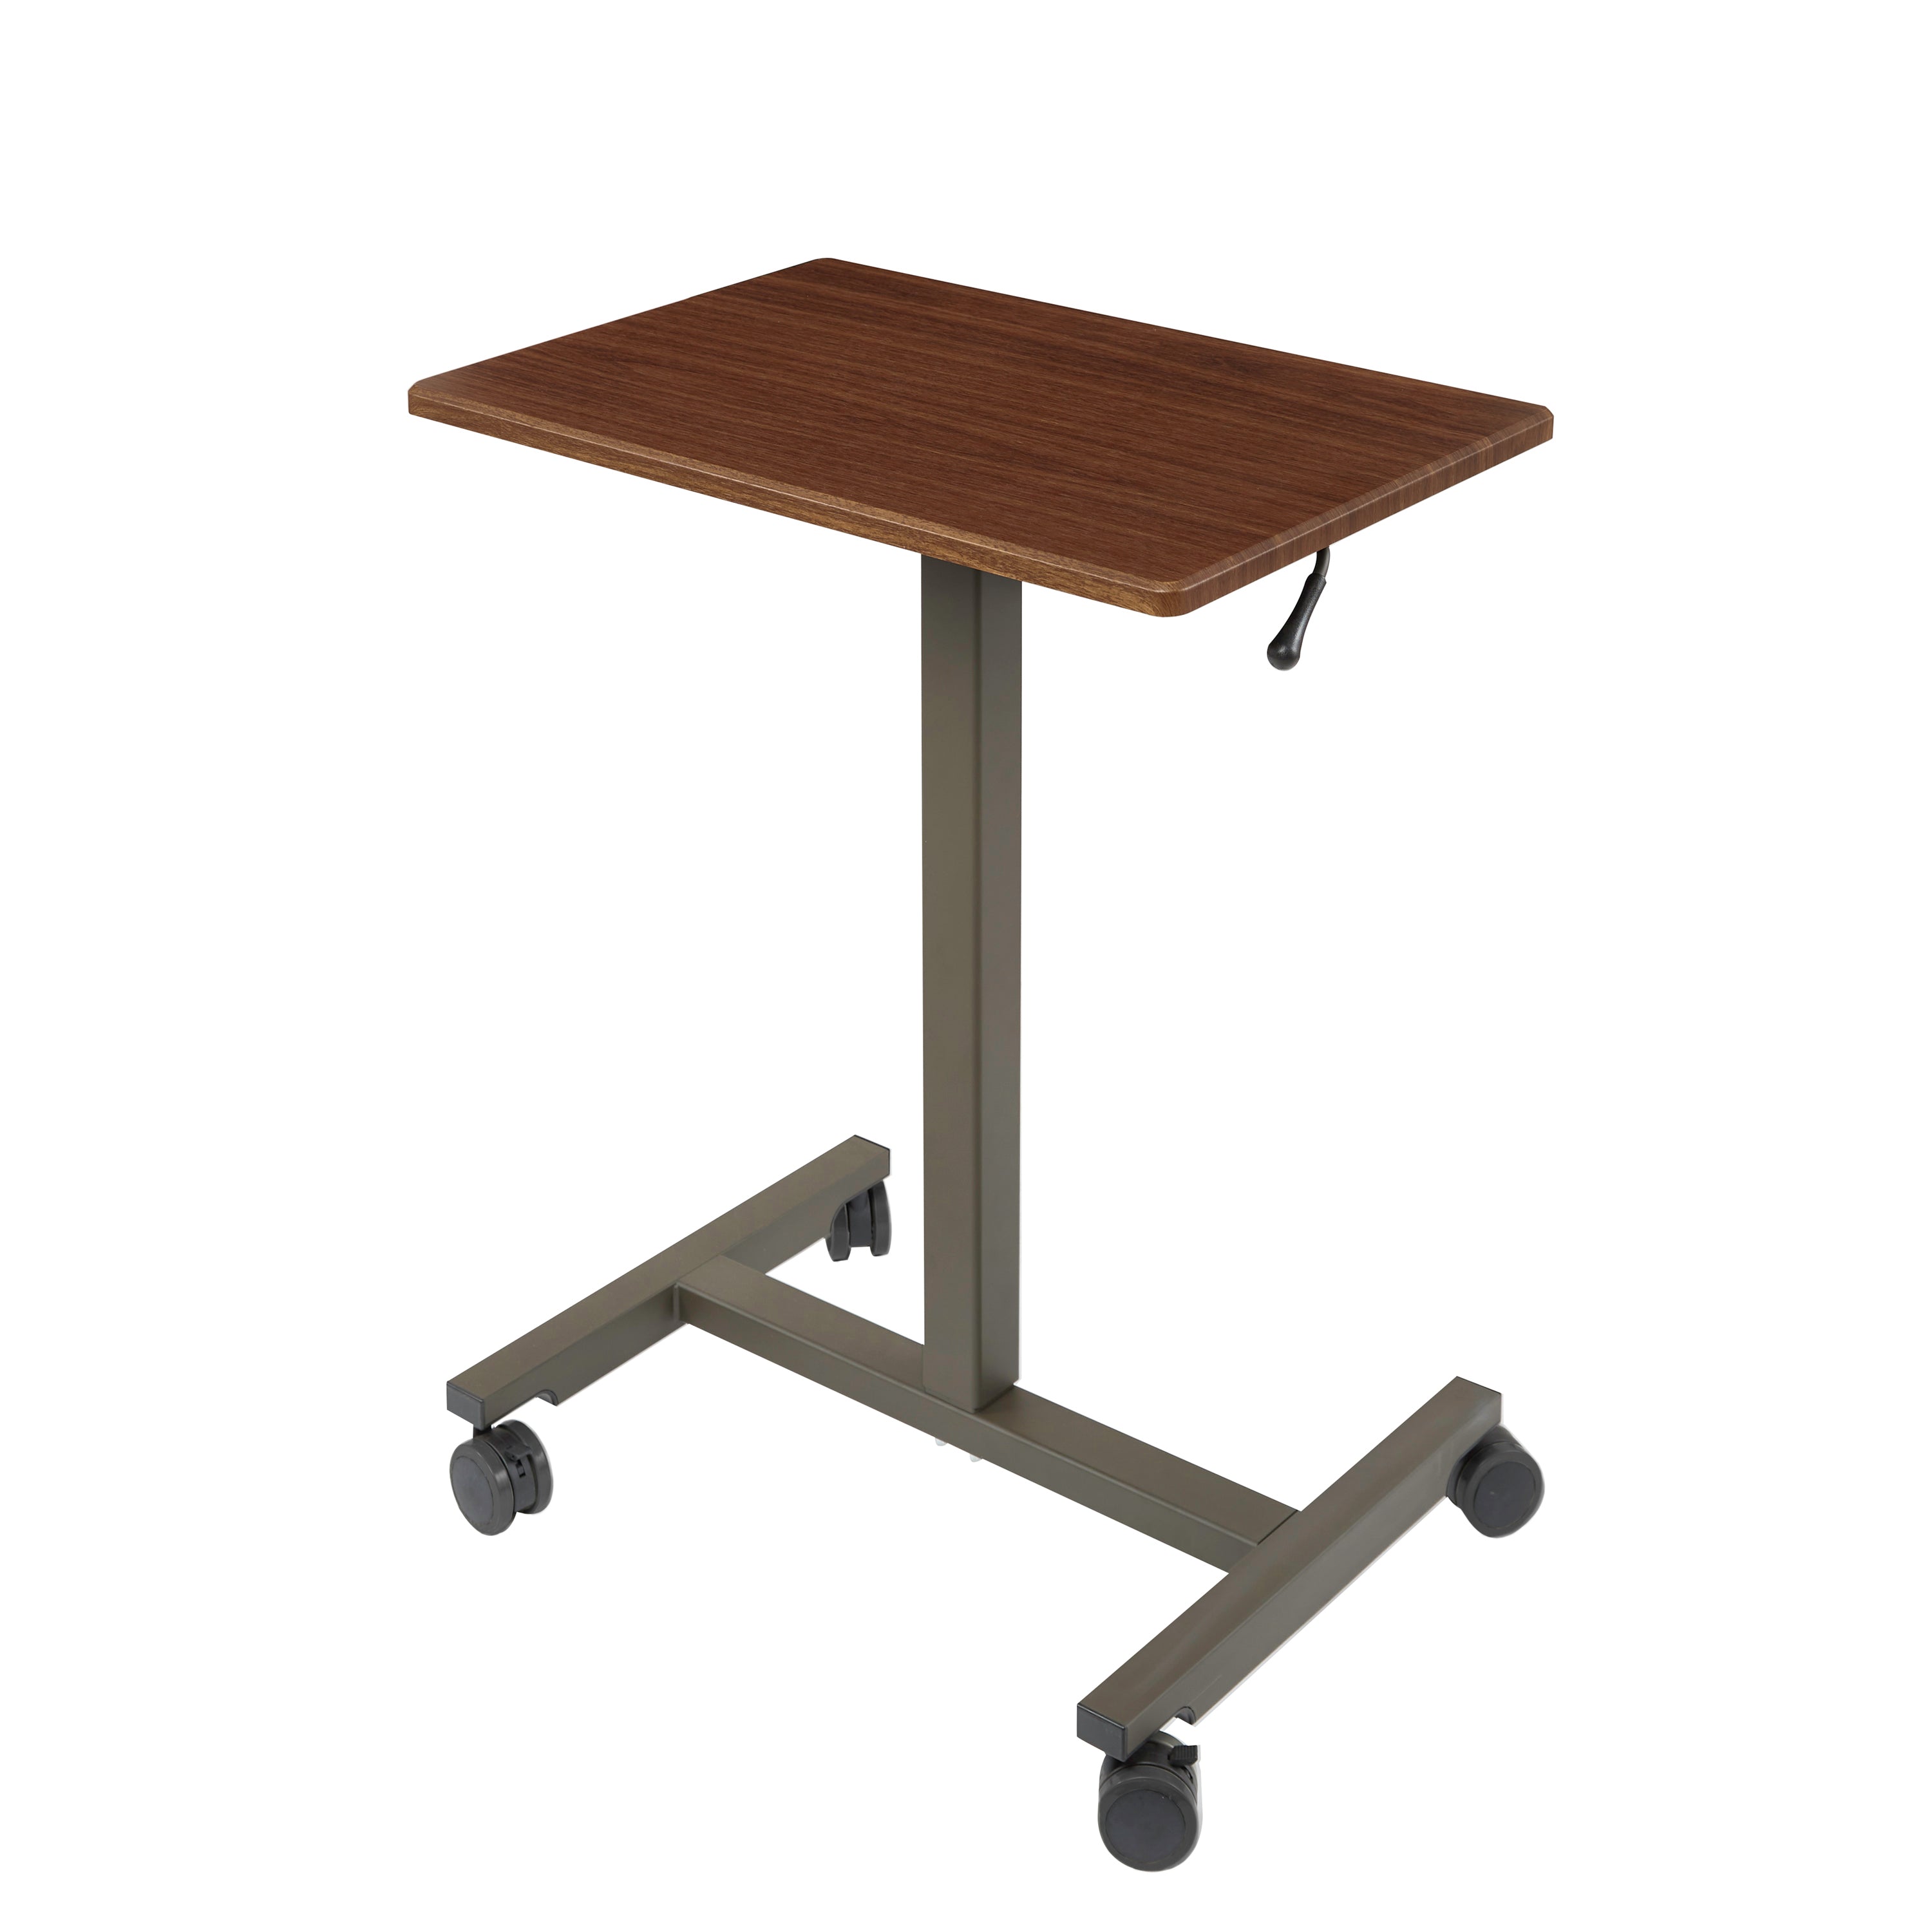 AIRLIFT PNEUMATIC LAPTOP COMPUTER SIT-STAND MOBILE DESK CART HEIGHT-ADJUSTABLE, MAPLE